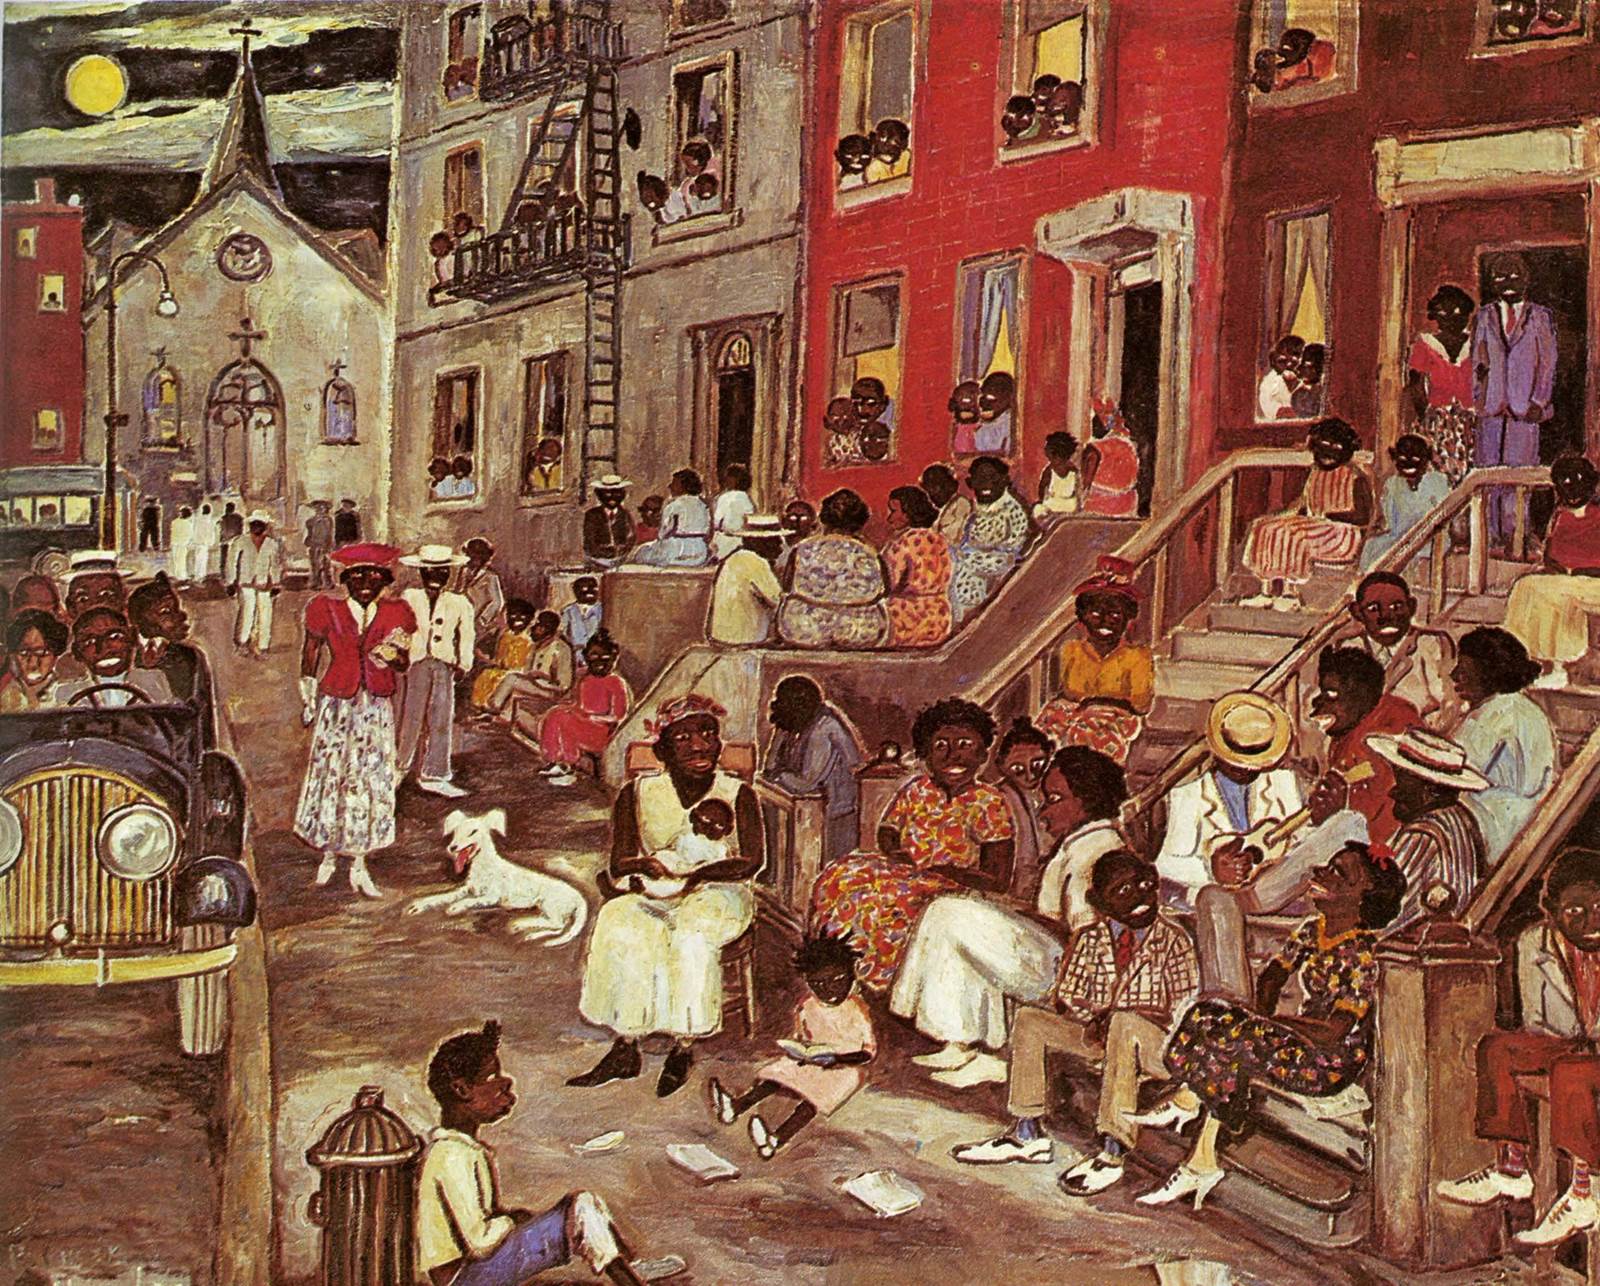 An image of the painting “Midsummer Night in Harlem” by Palmer Hayden. The nighttime image focuses on an energetic community scene in Harlem, New York, wherein many smiling and talking Black residents (adults and children alike) sit on apartment steps, look out apartment windows, walk down the street, congregate outside a church, and ride in vehicles. The residents wear various colorful suits, dresses, skirts, and hats like Sunday church attire.